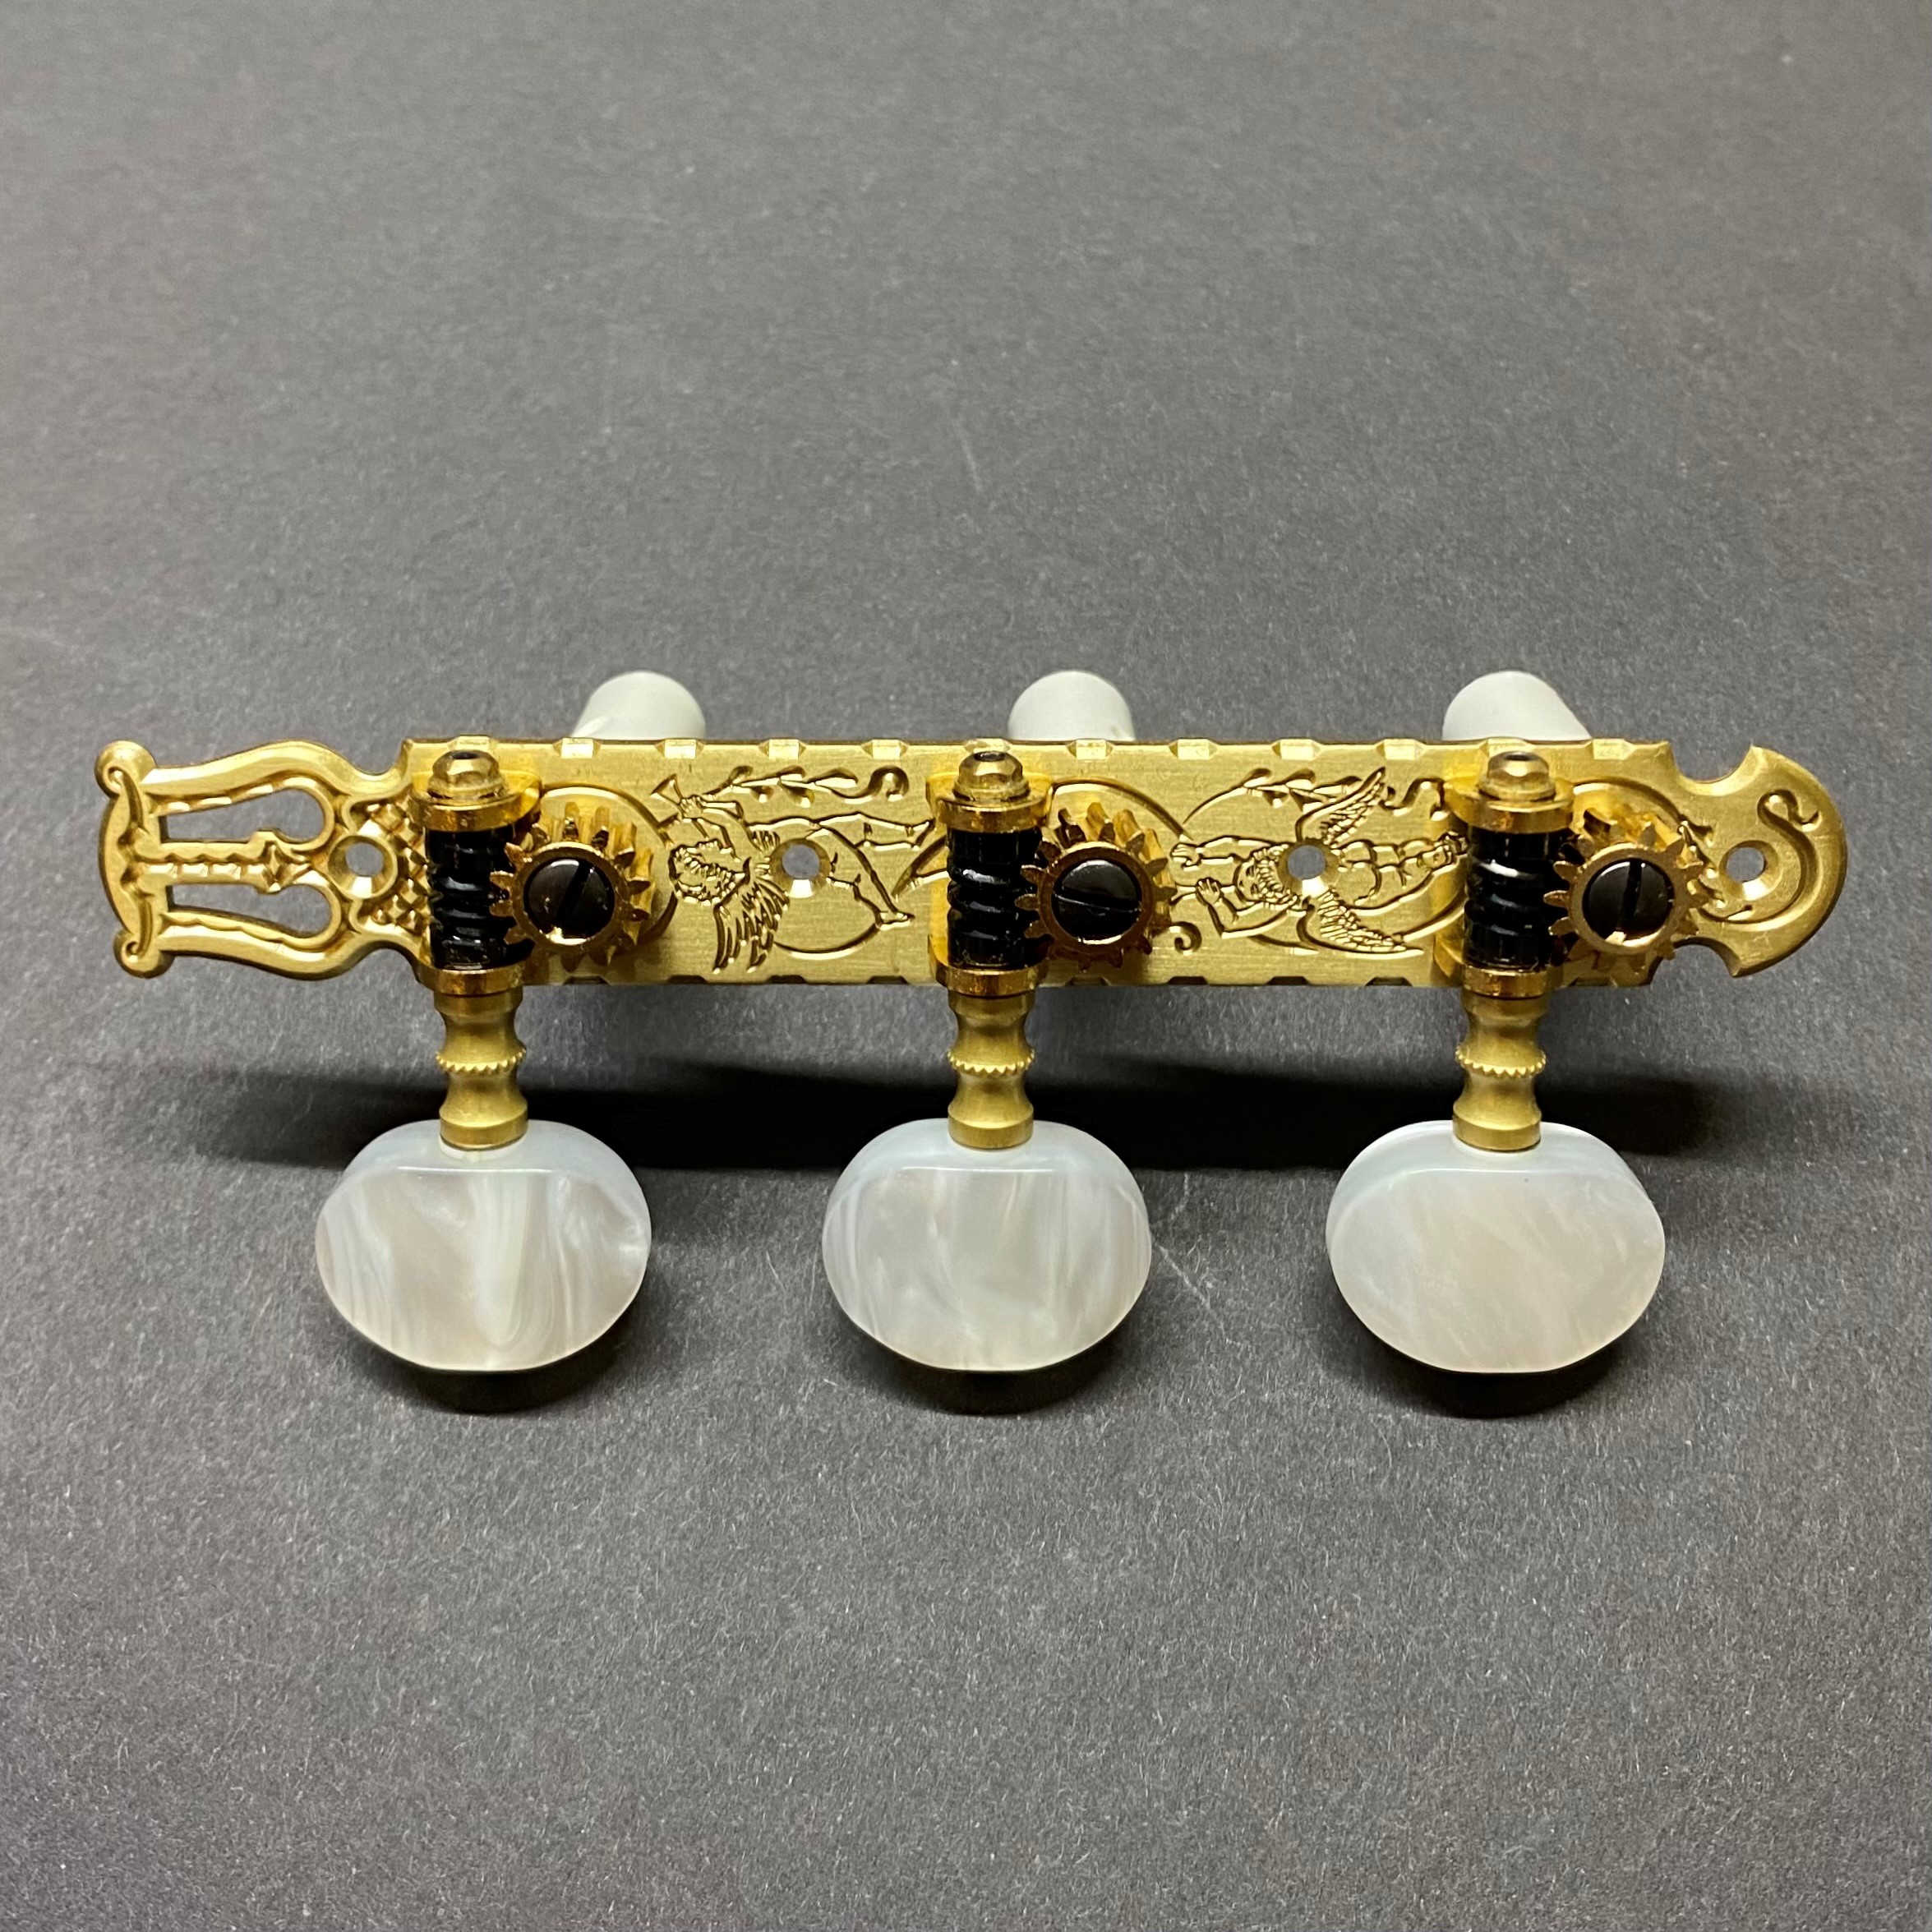 Gotoh Tuning Machines 35G3600C-2W Series Pearloid Buttons 